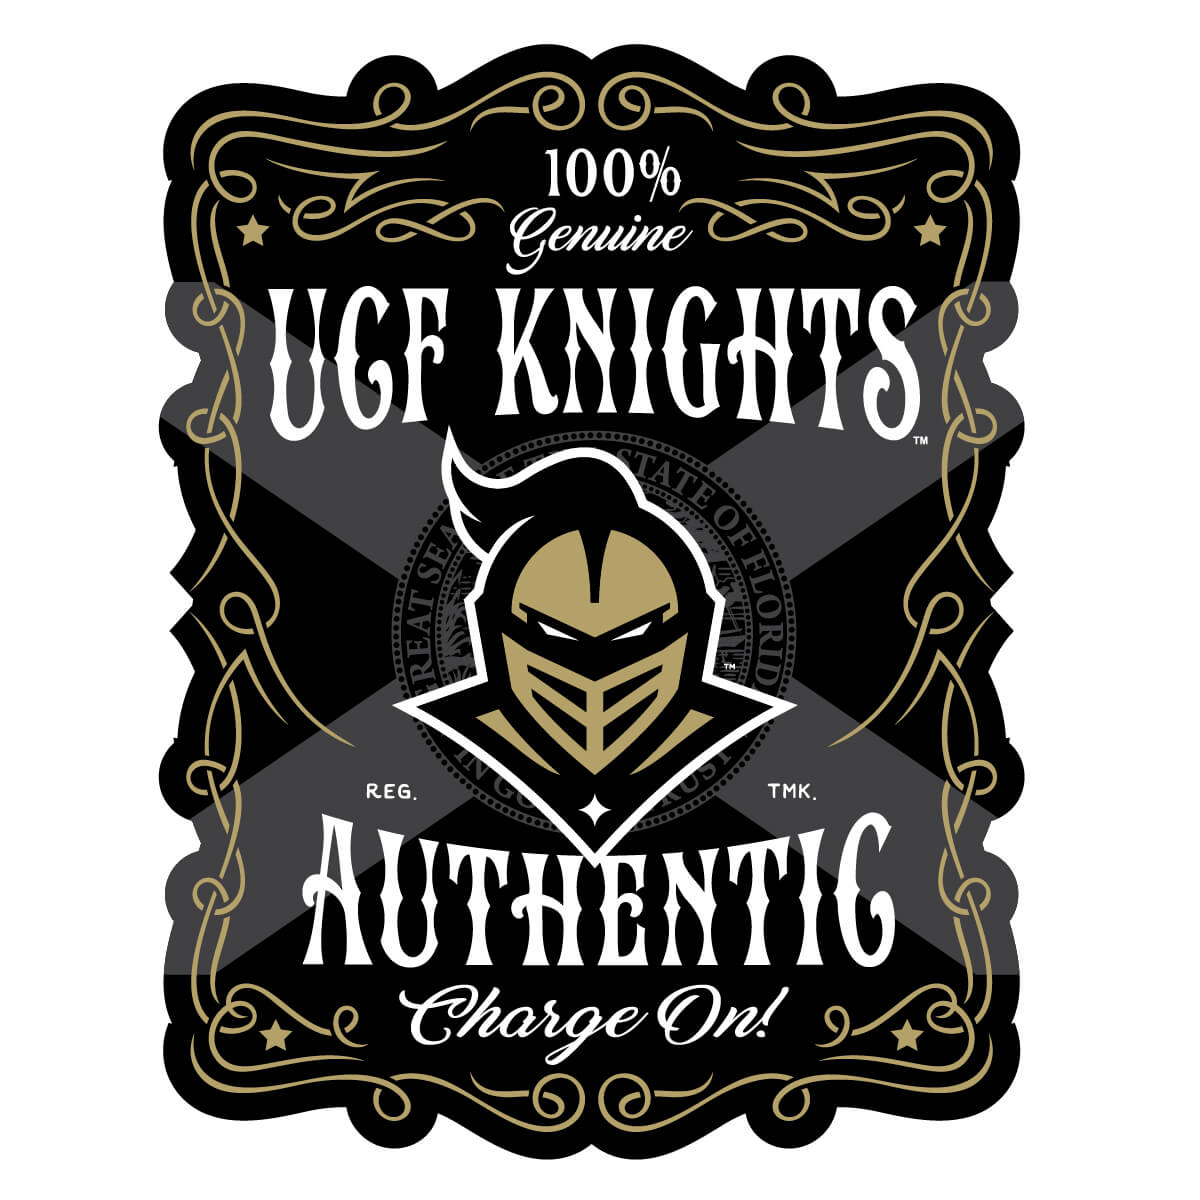 UCF Knights Whiskey Label Decal